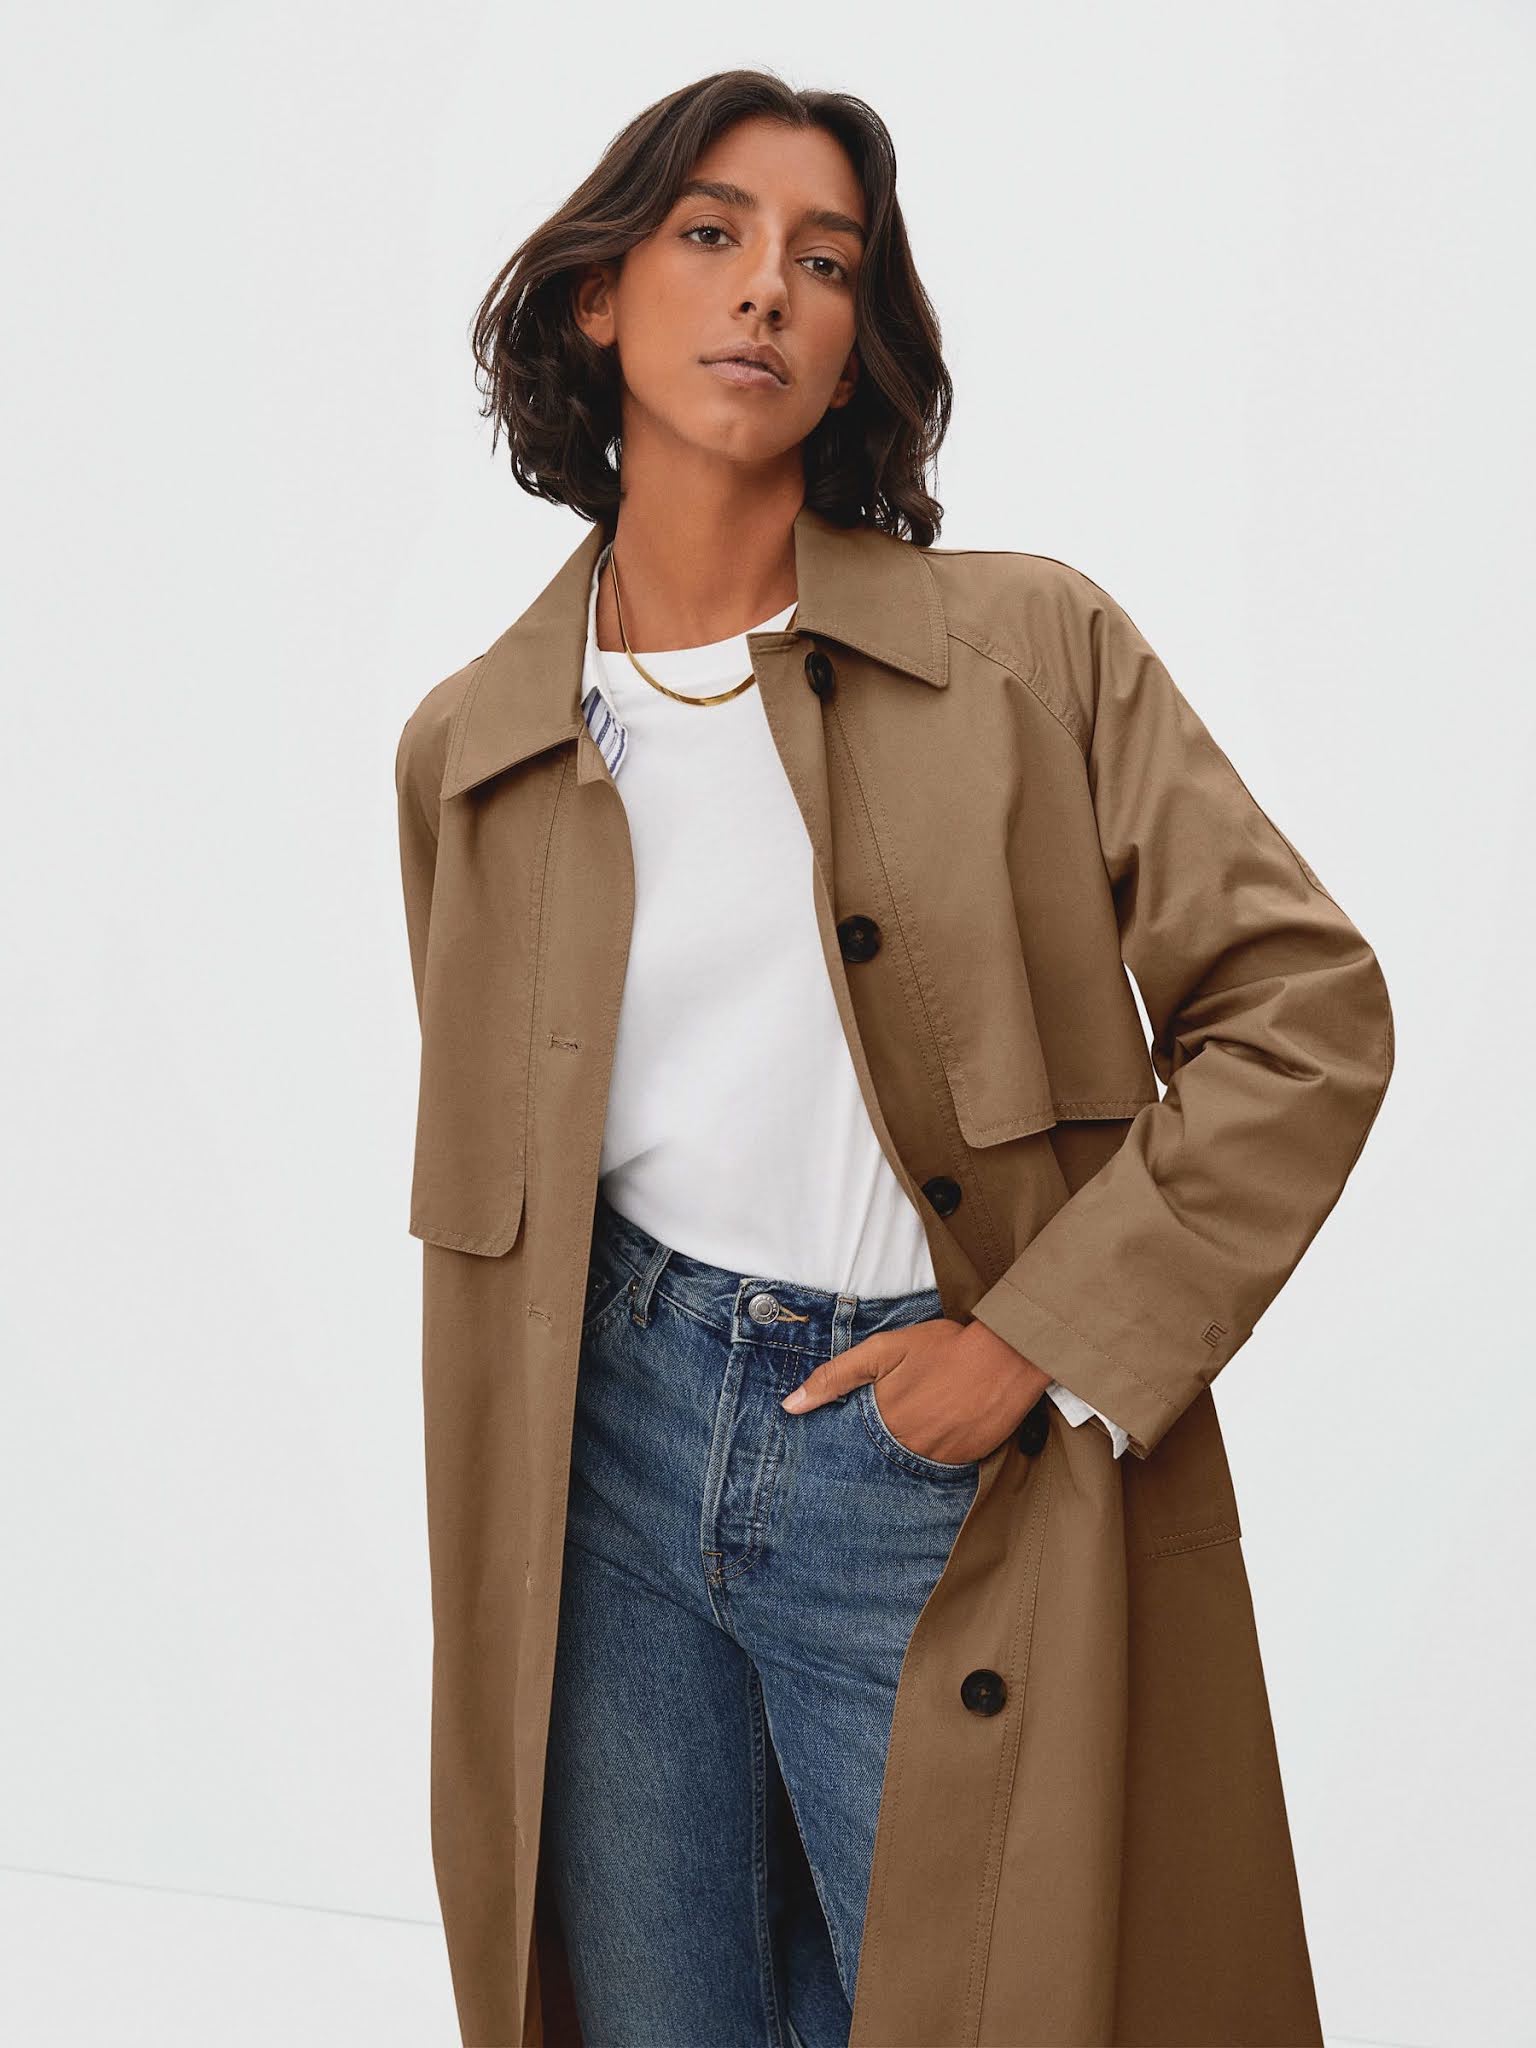 7 Best Outerwear Picks from Everlane — Classic Long Trench Mac Coat Fall and Winter Outfit Idea